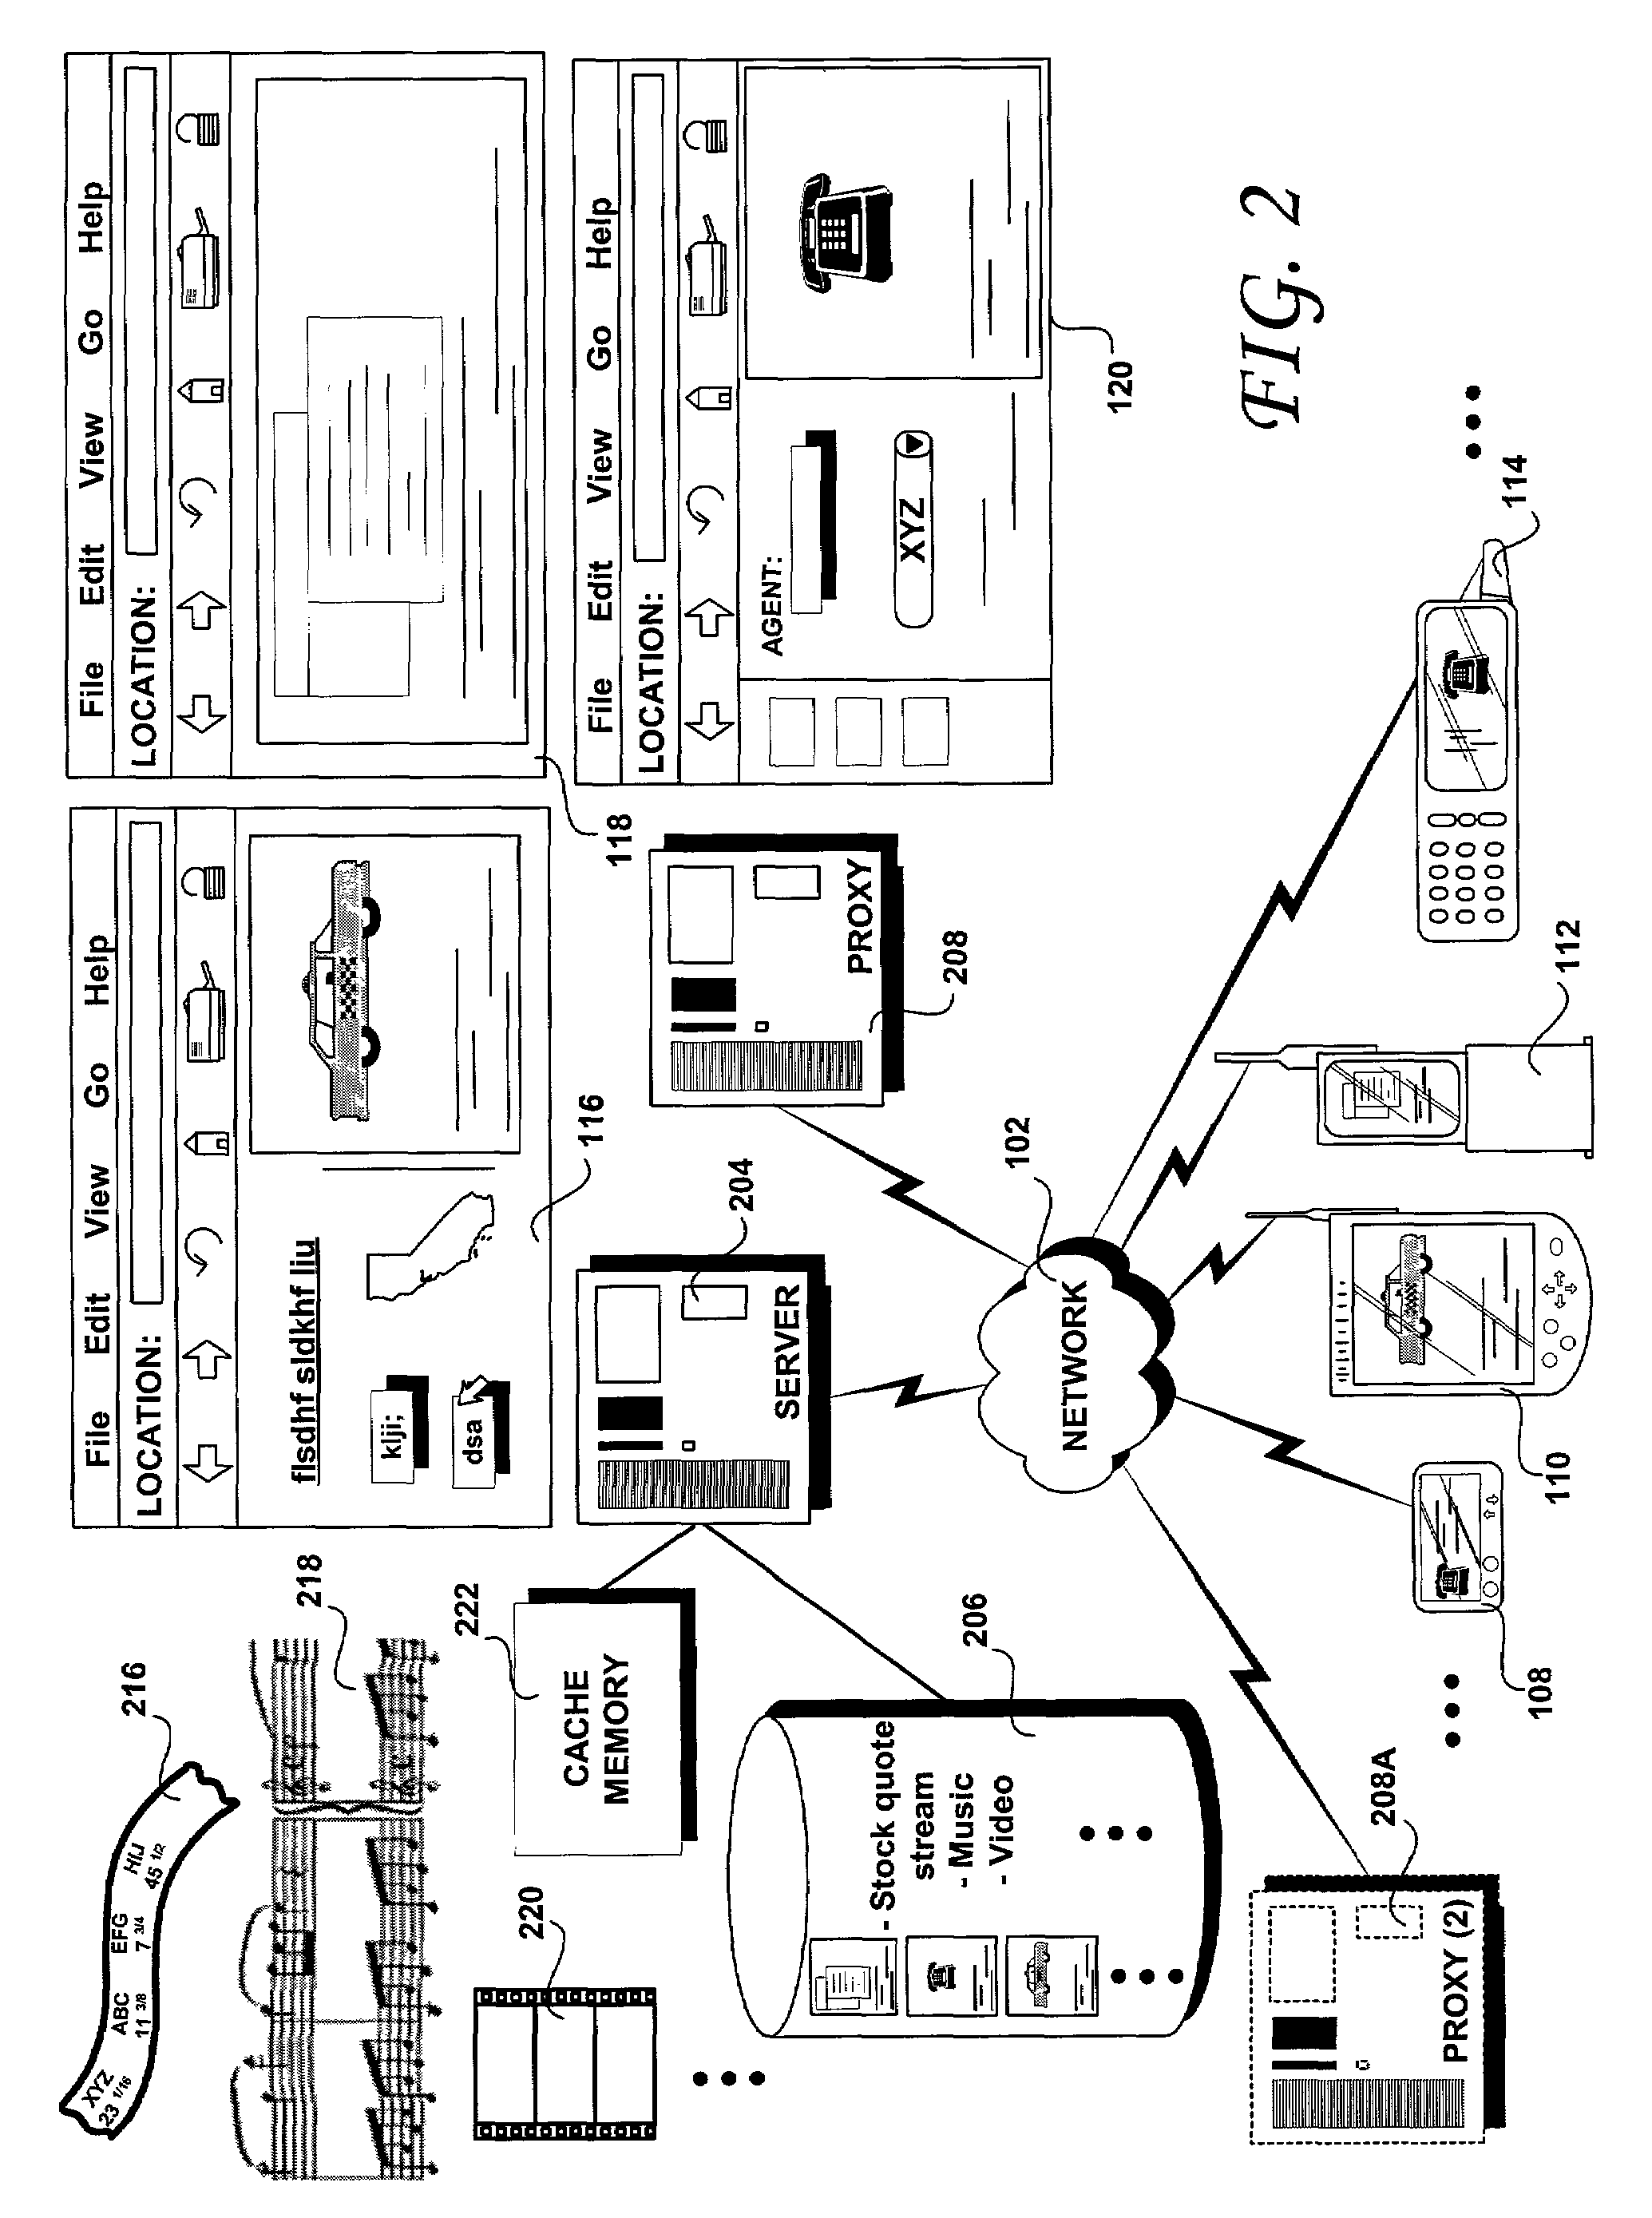 Methods and systems for dynamic and automatic content creation for mobile devices